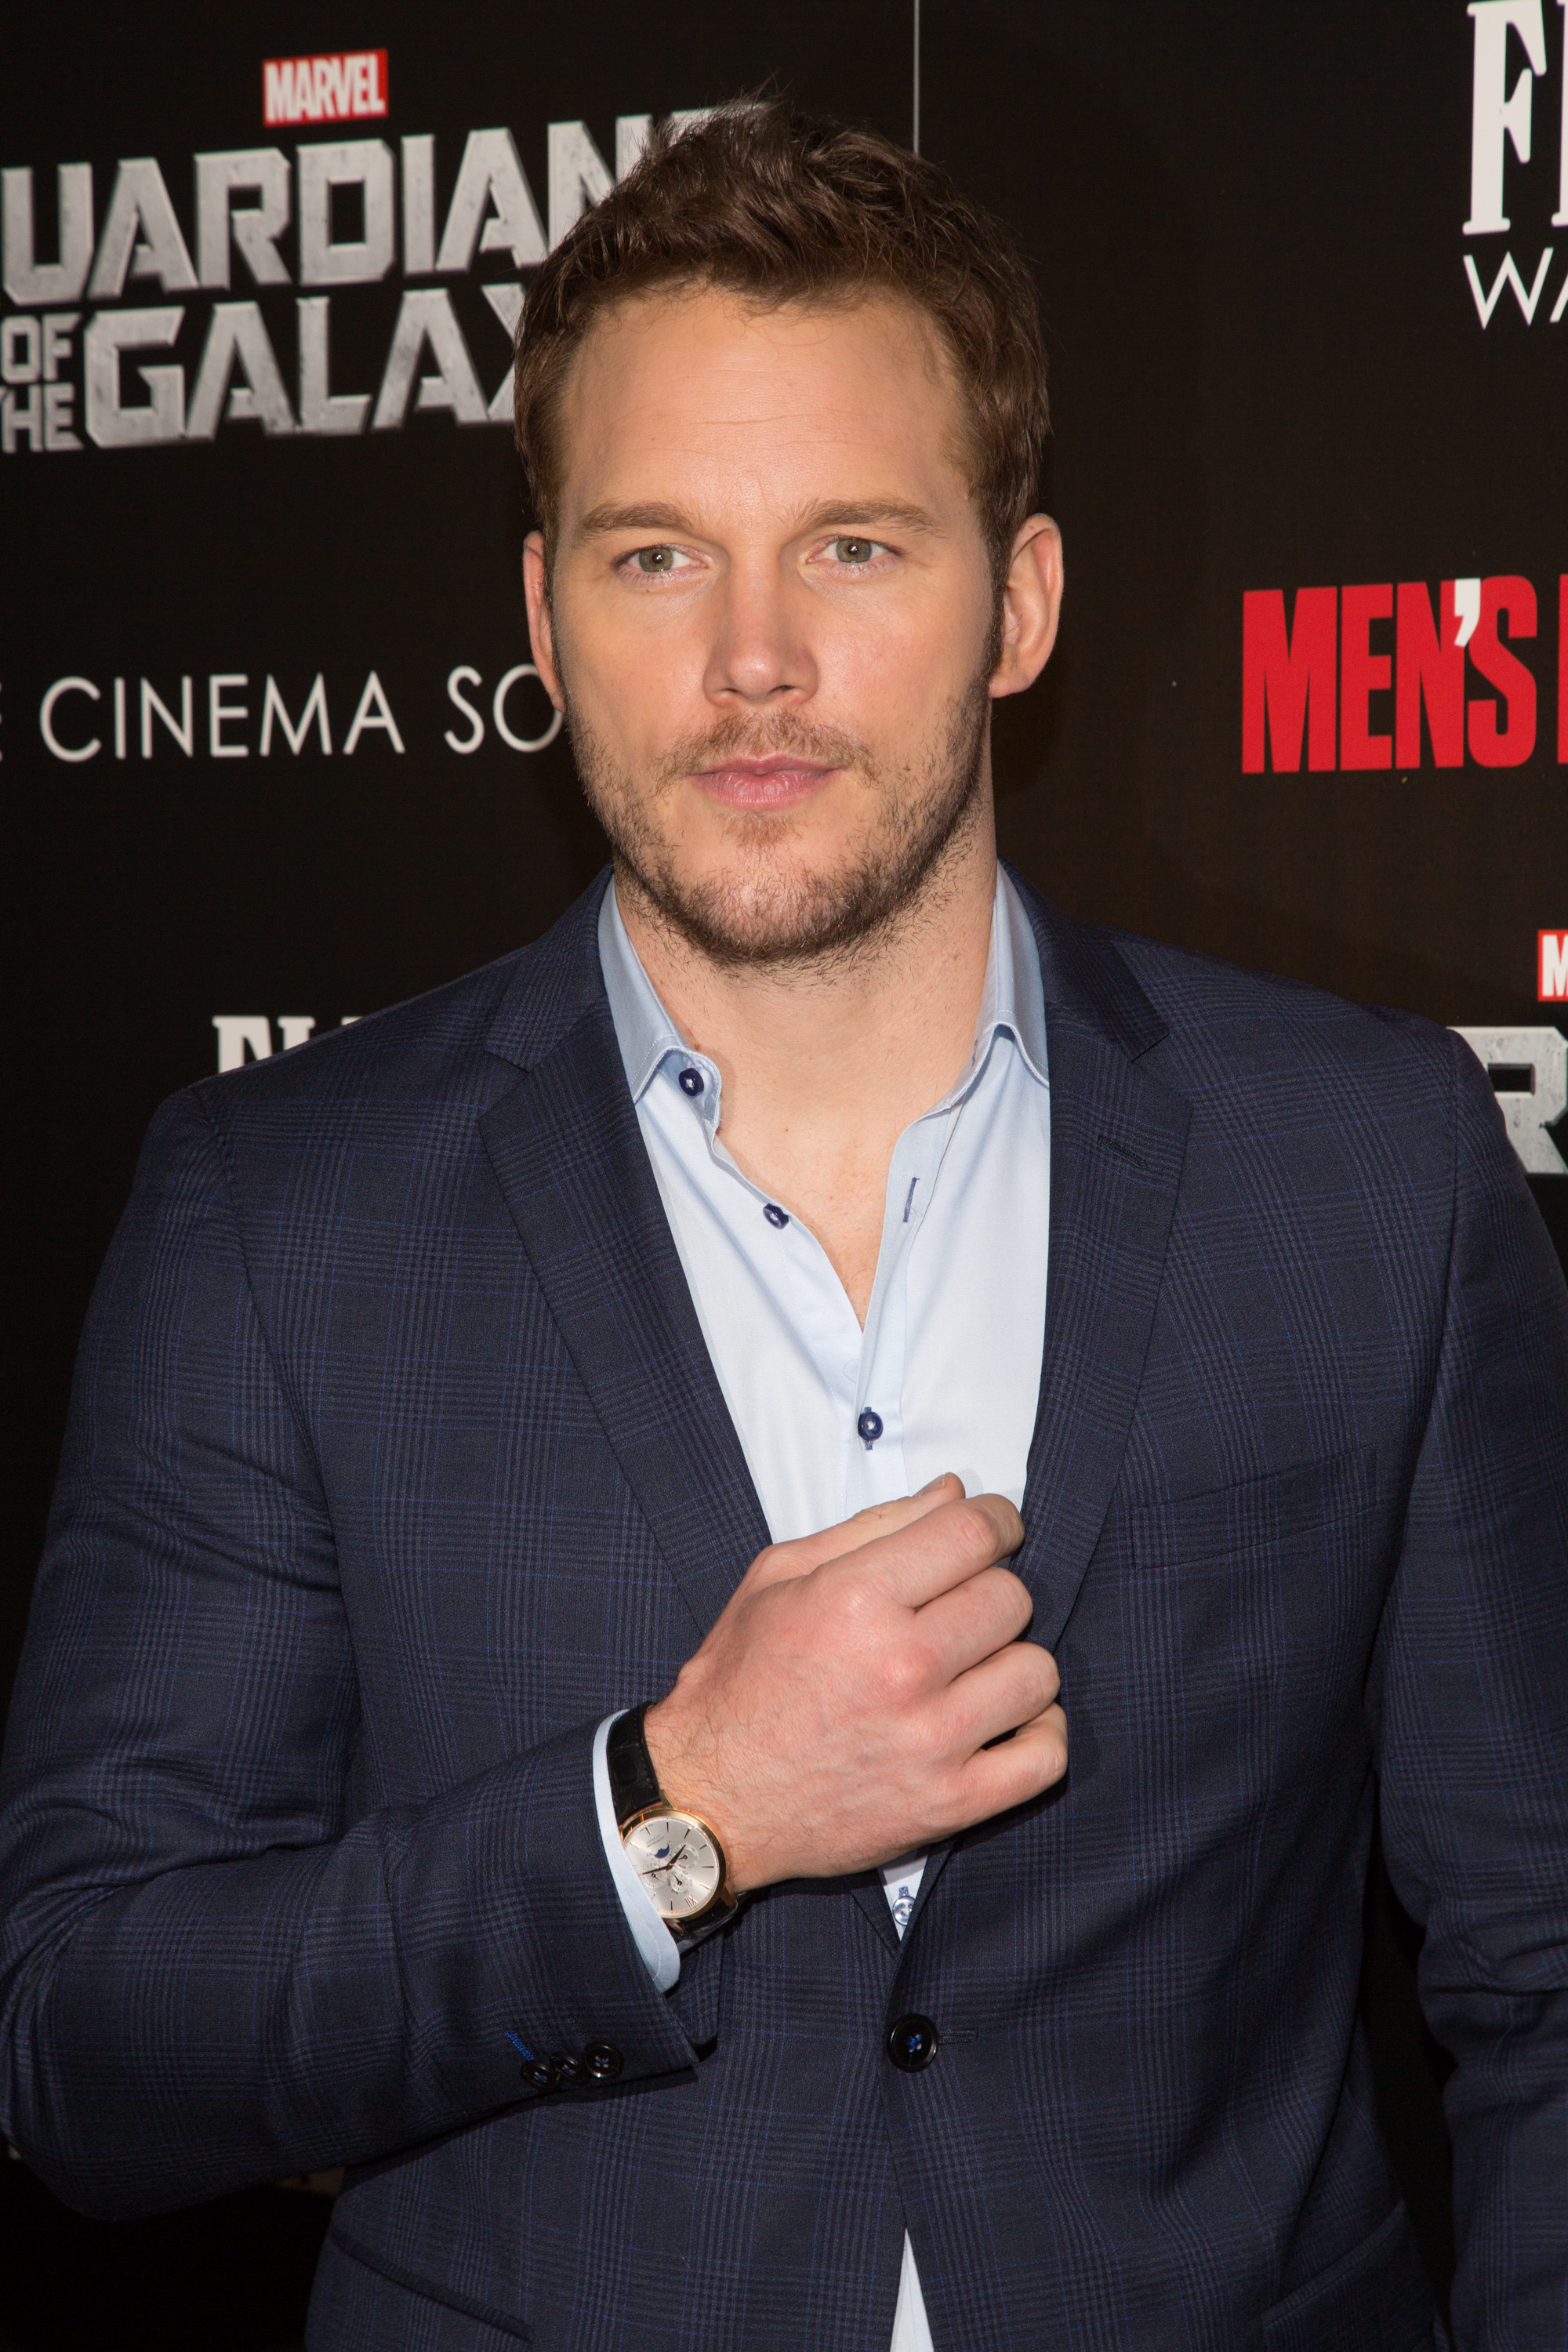 The Cinema Society With Men's Fitness And FIJI Water Host A Special Screening Of Marvel's "Guardians Of The Galaxy"